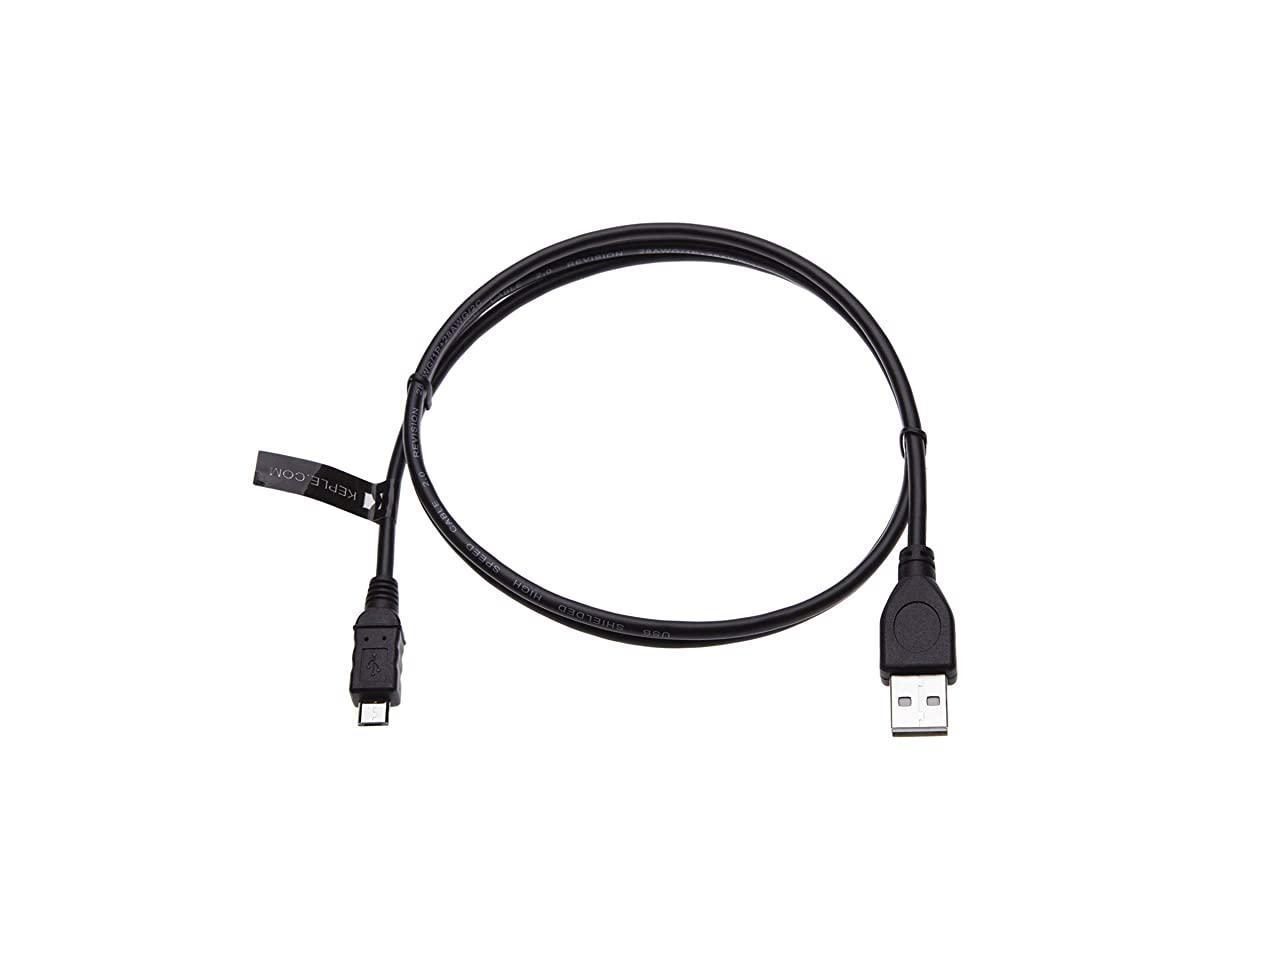 2m USB Data Charger Power Black Cable Lead for TomTom GO 5200 GPS Sat Nav 